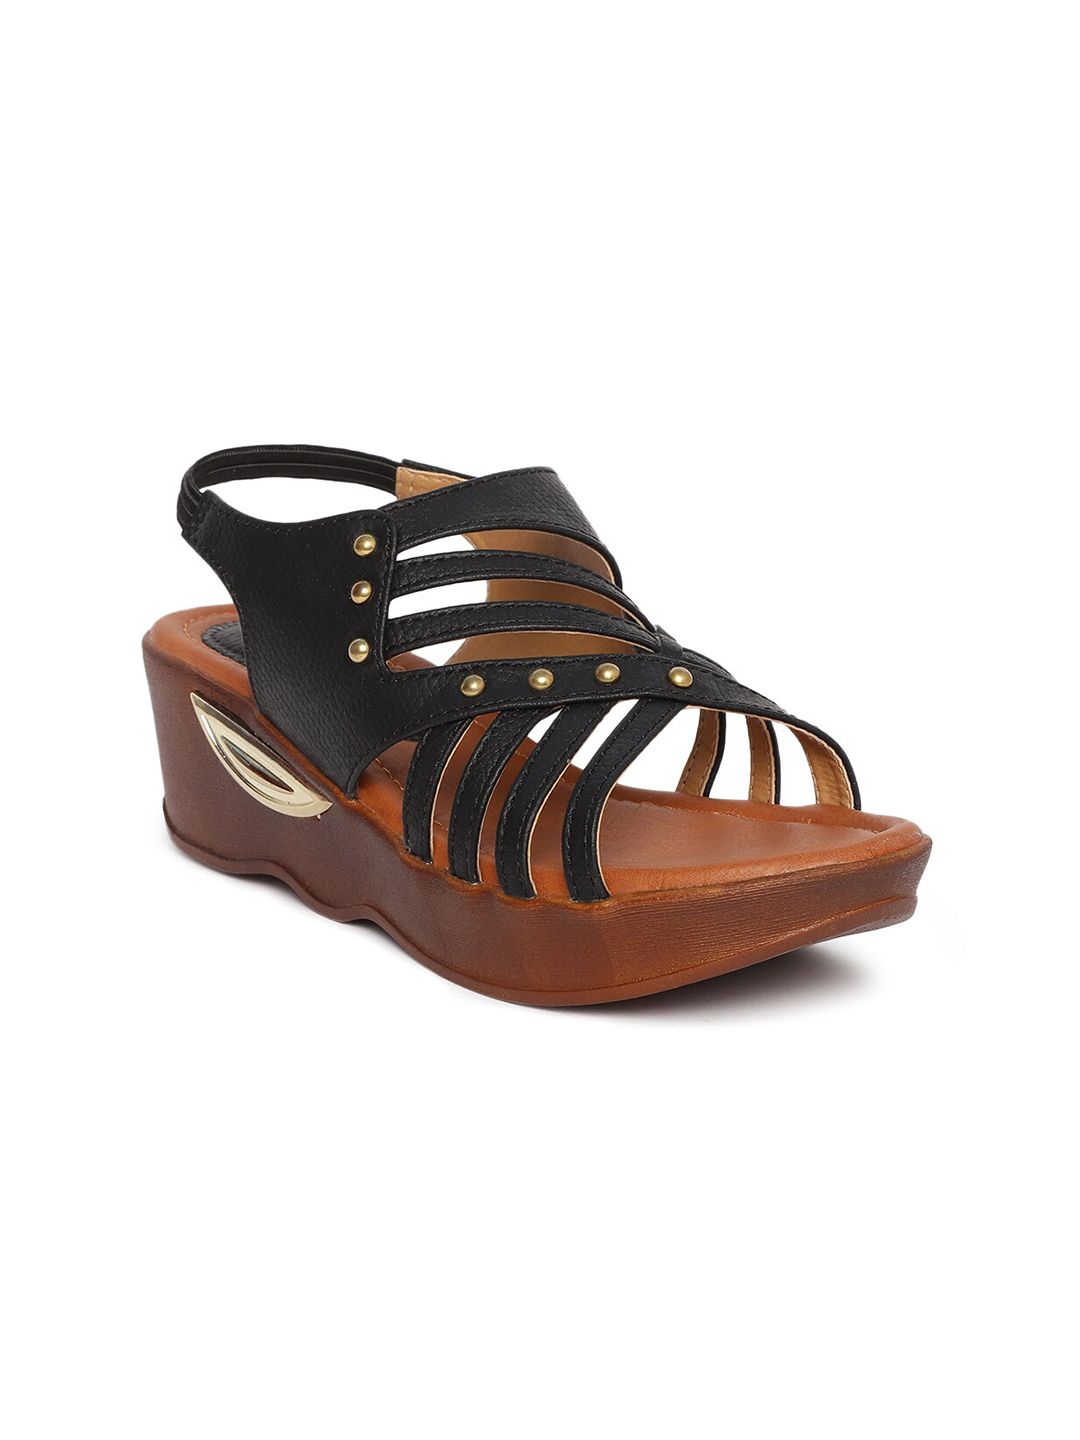 EVERLY Women Black Striped Wedge Heels Price in India